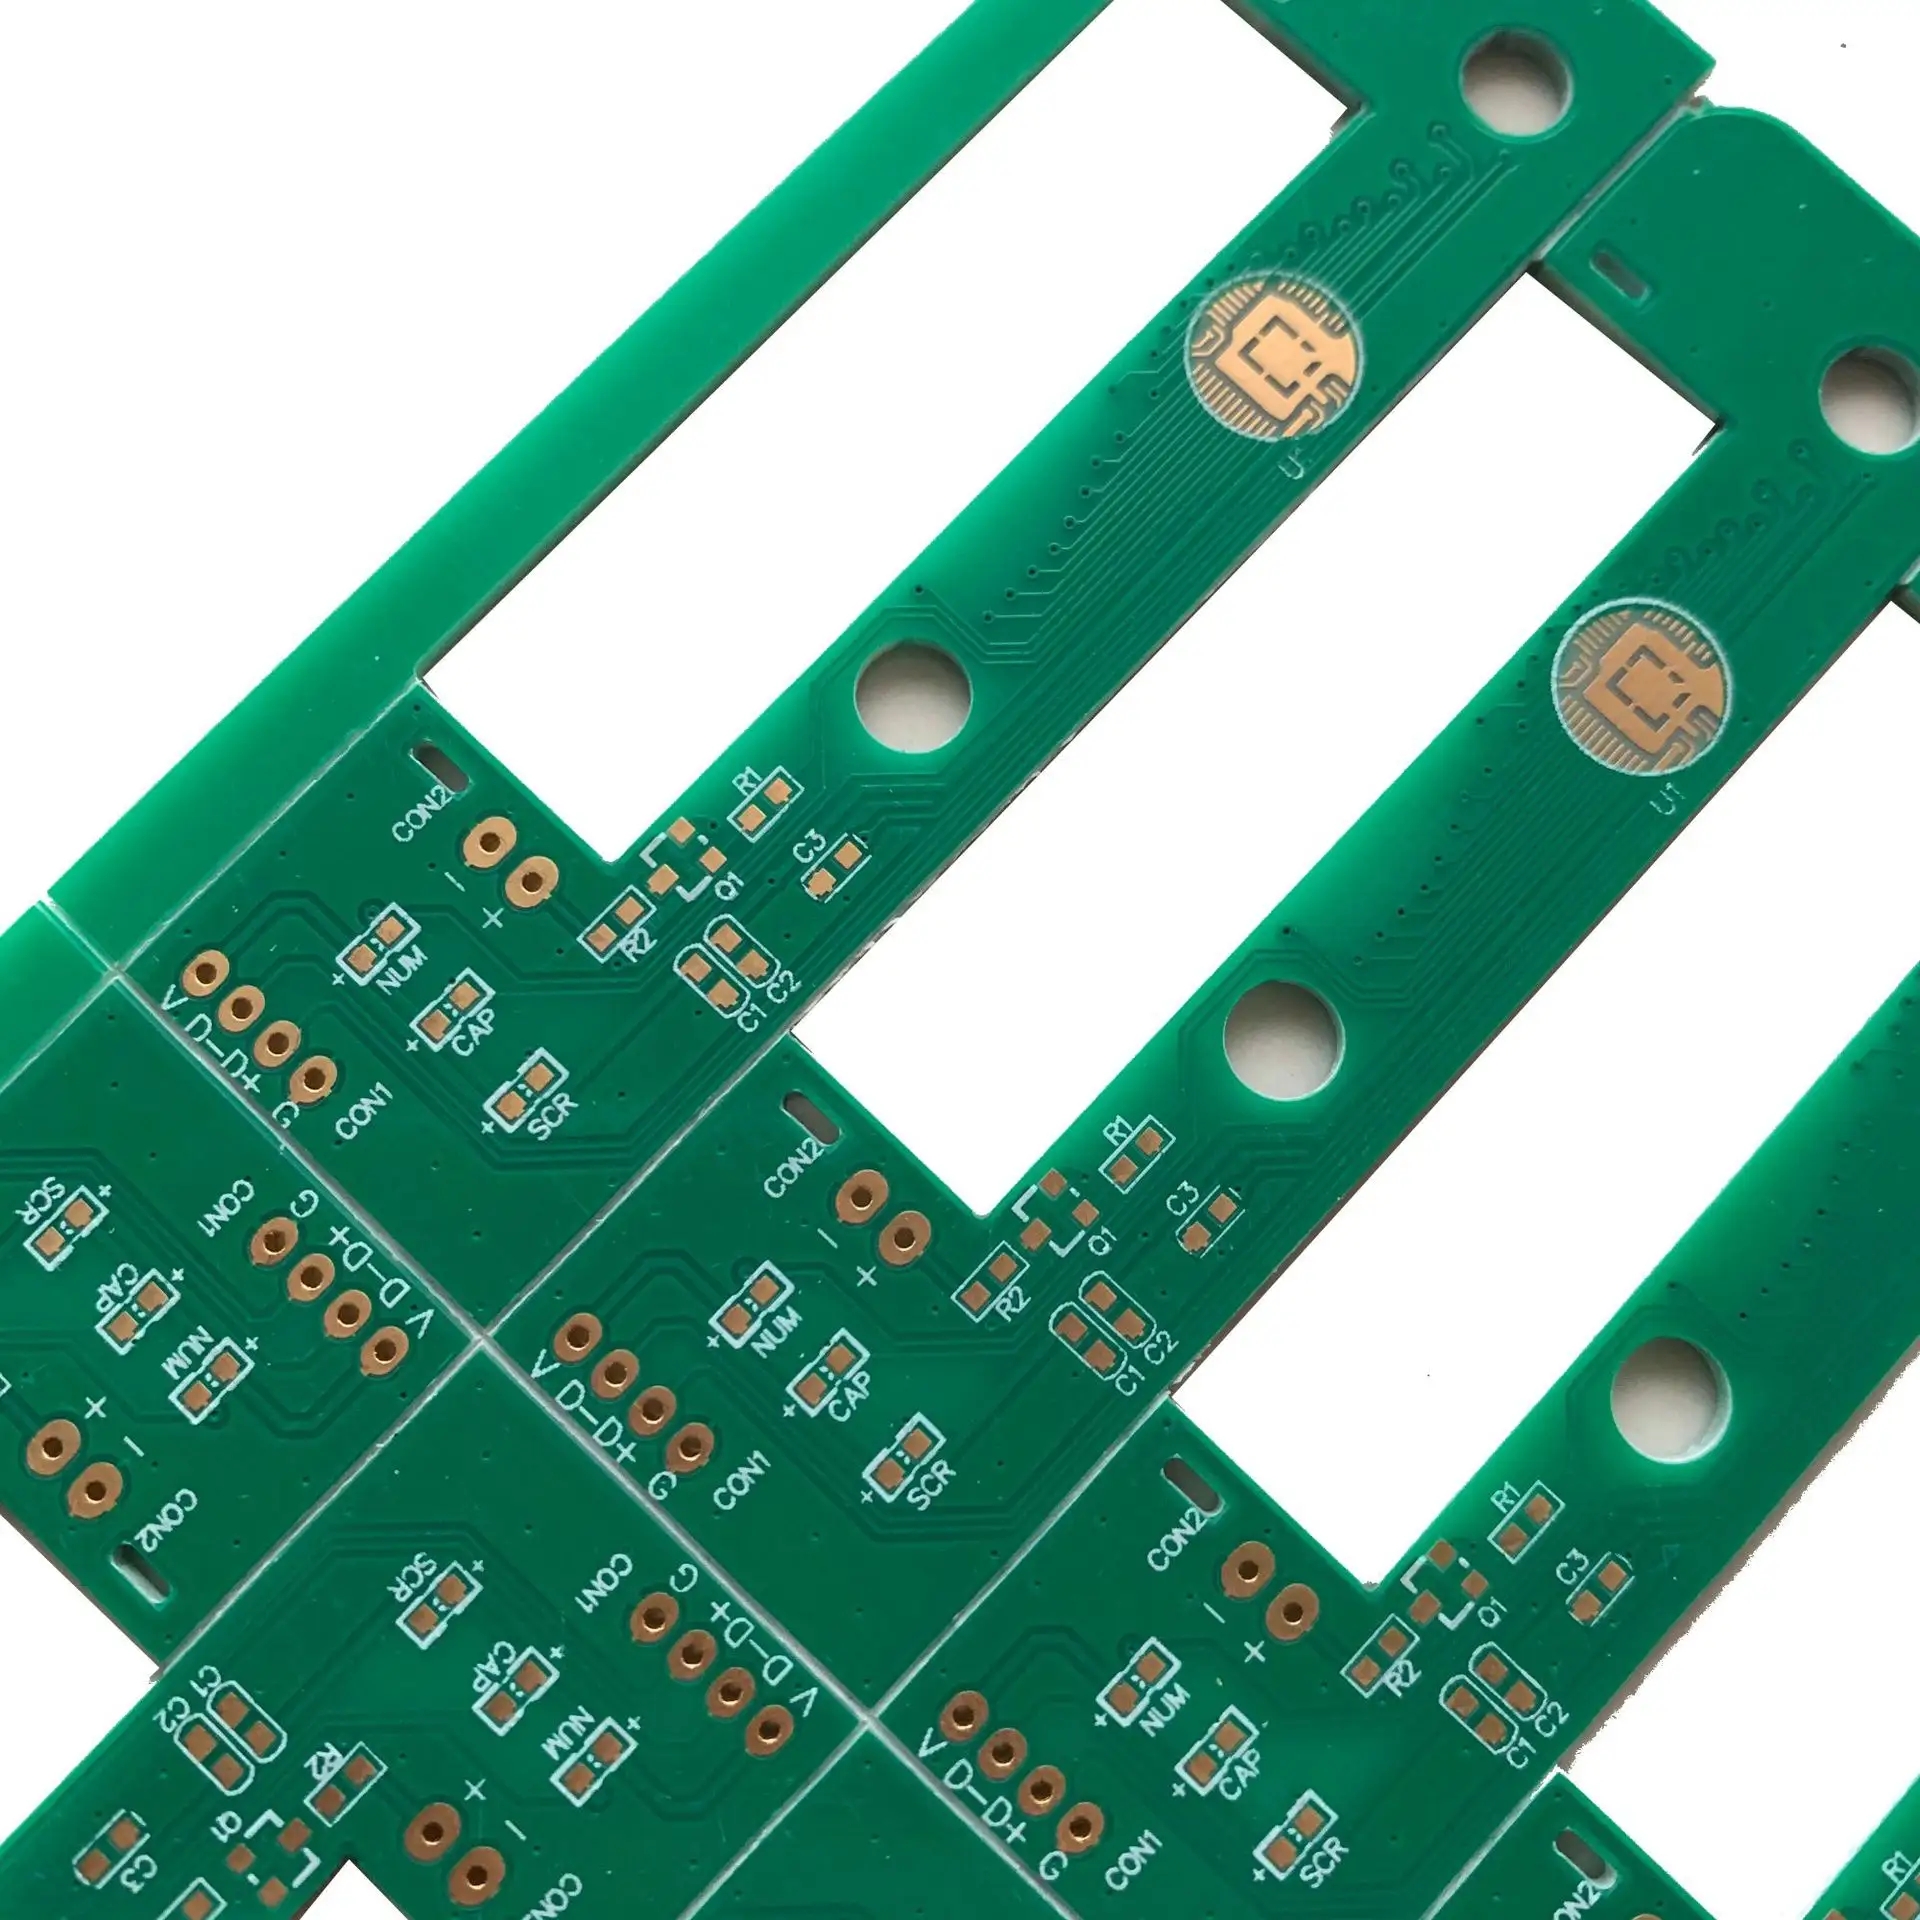 Circuit board manufacturer: magnetostatic shielding of shielding magnetic field materials